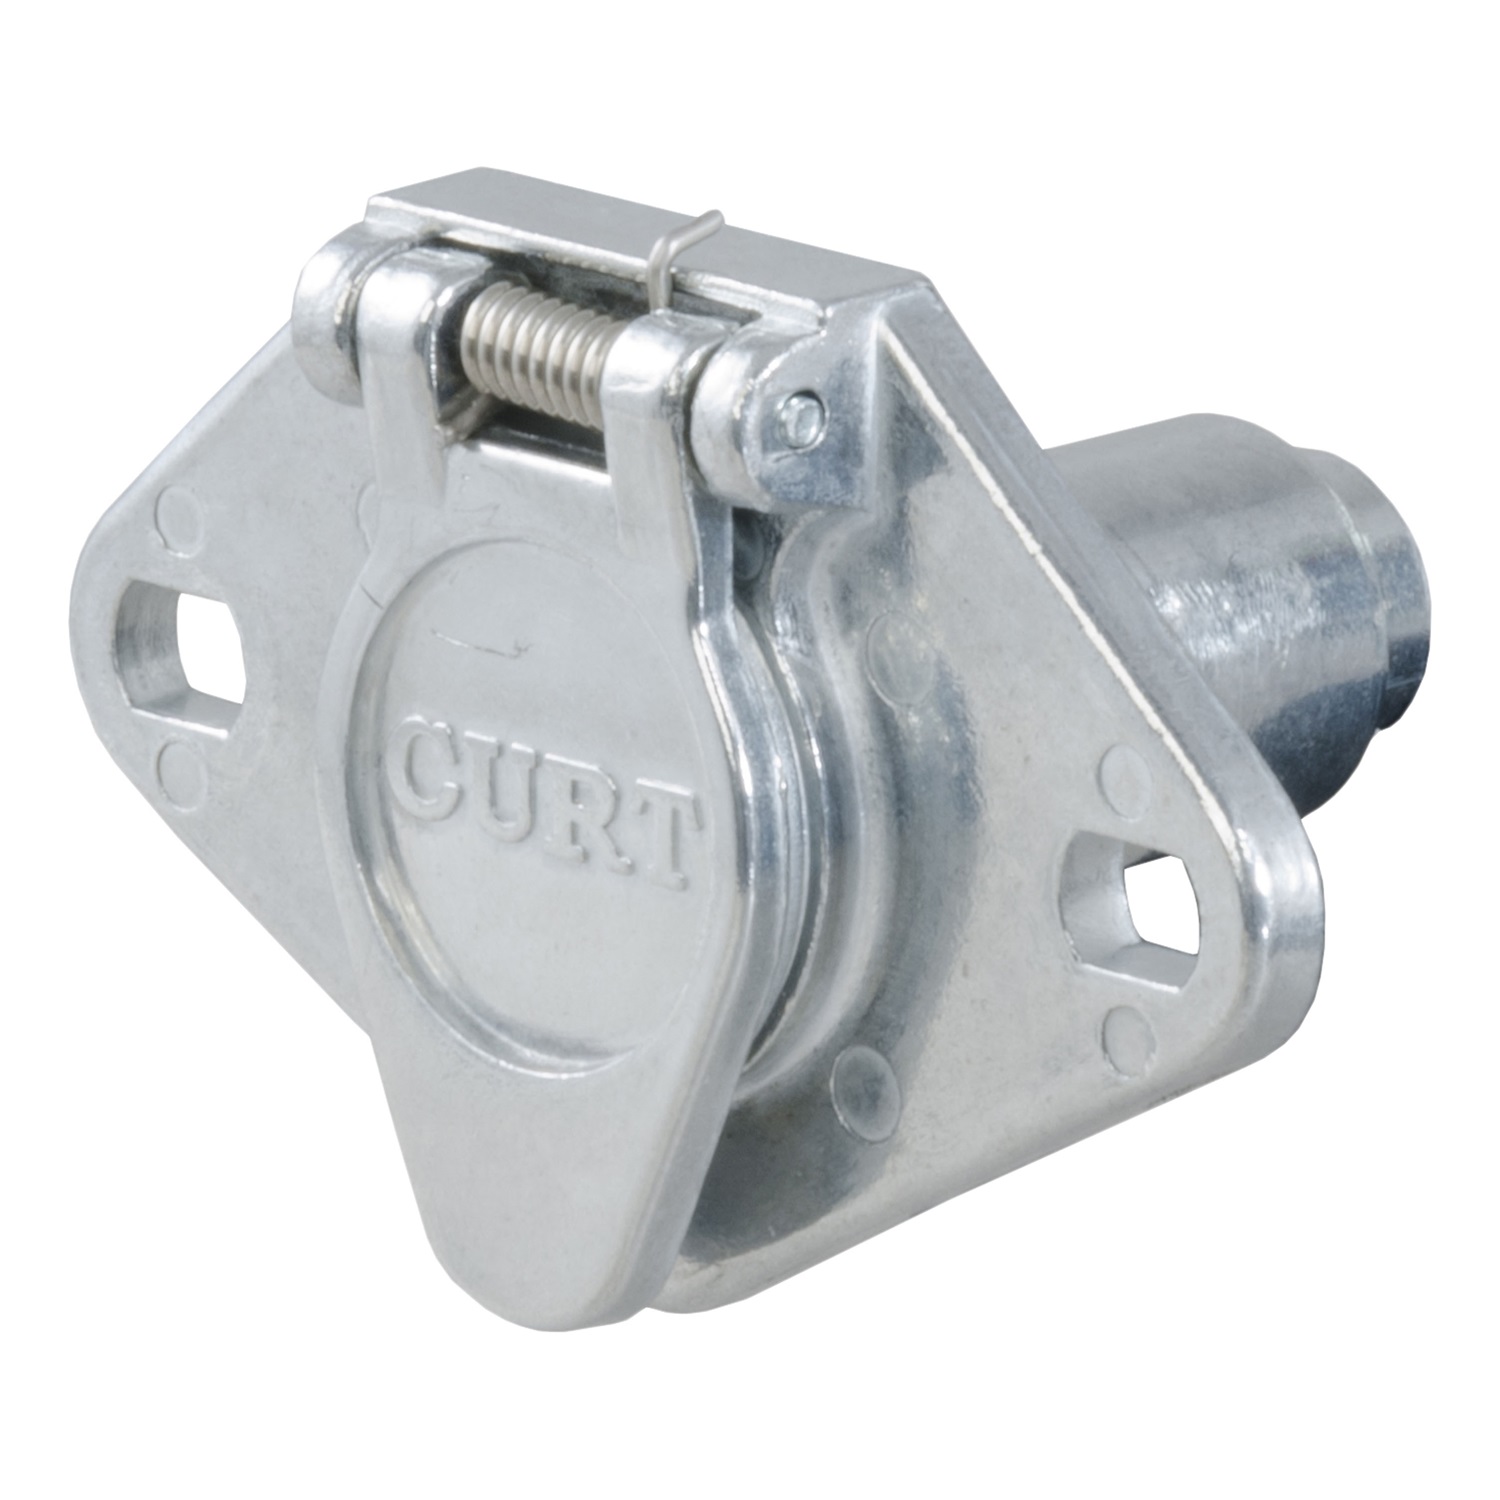 CURT Manufacturing CURT Manufacturing 58071 4-Way Round Wiring Connector  Fits